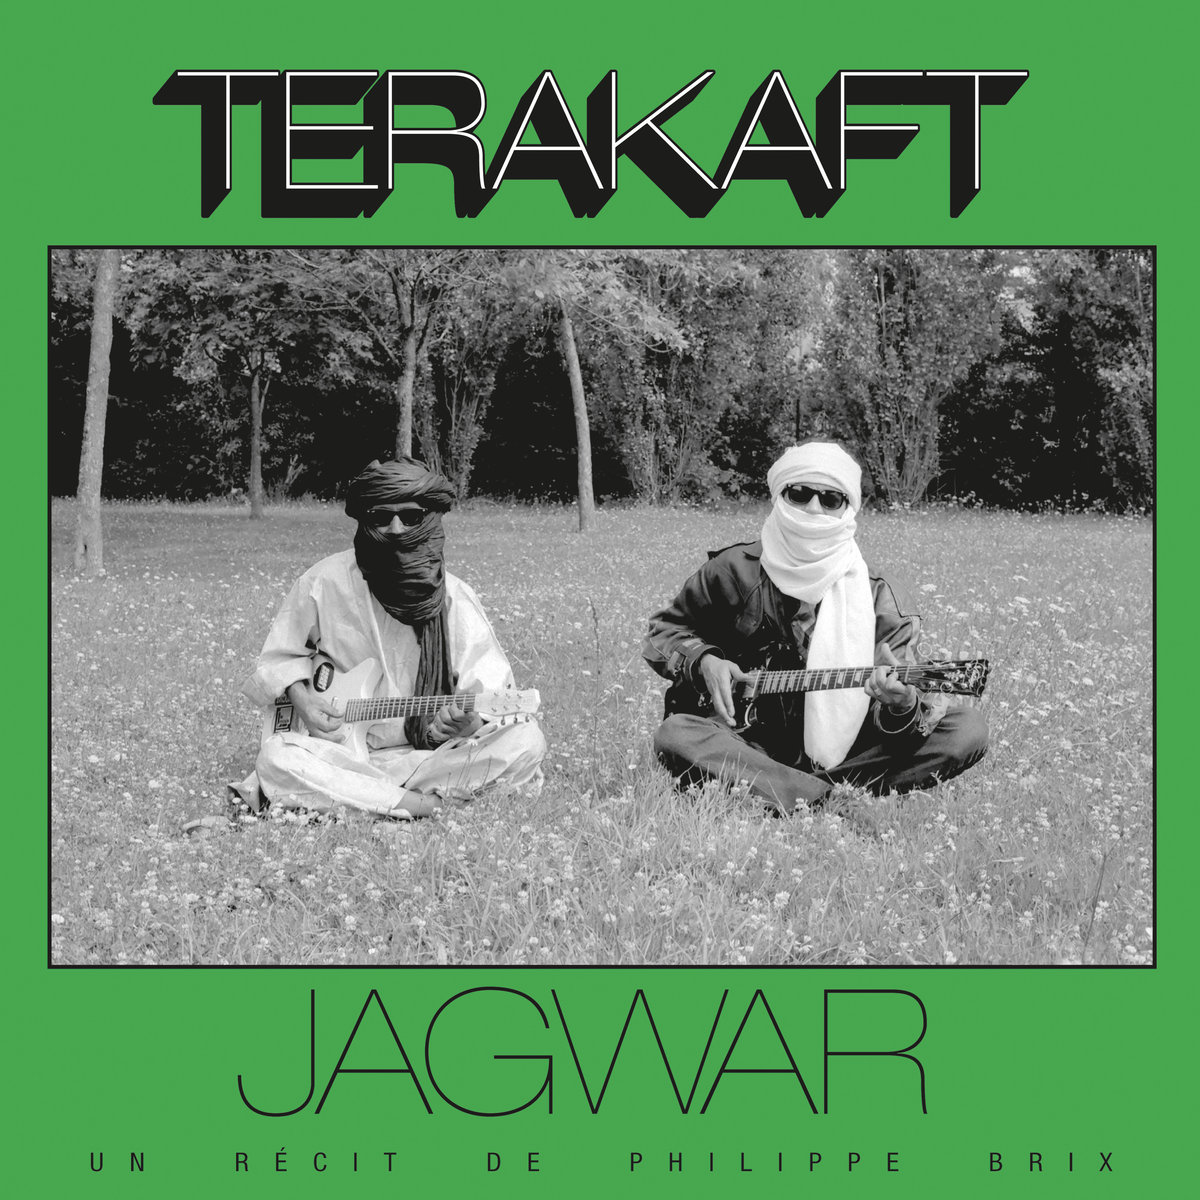 terakaft jagwar - photo of two men in headscarves sitting on grass and playing guitars